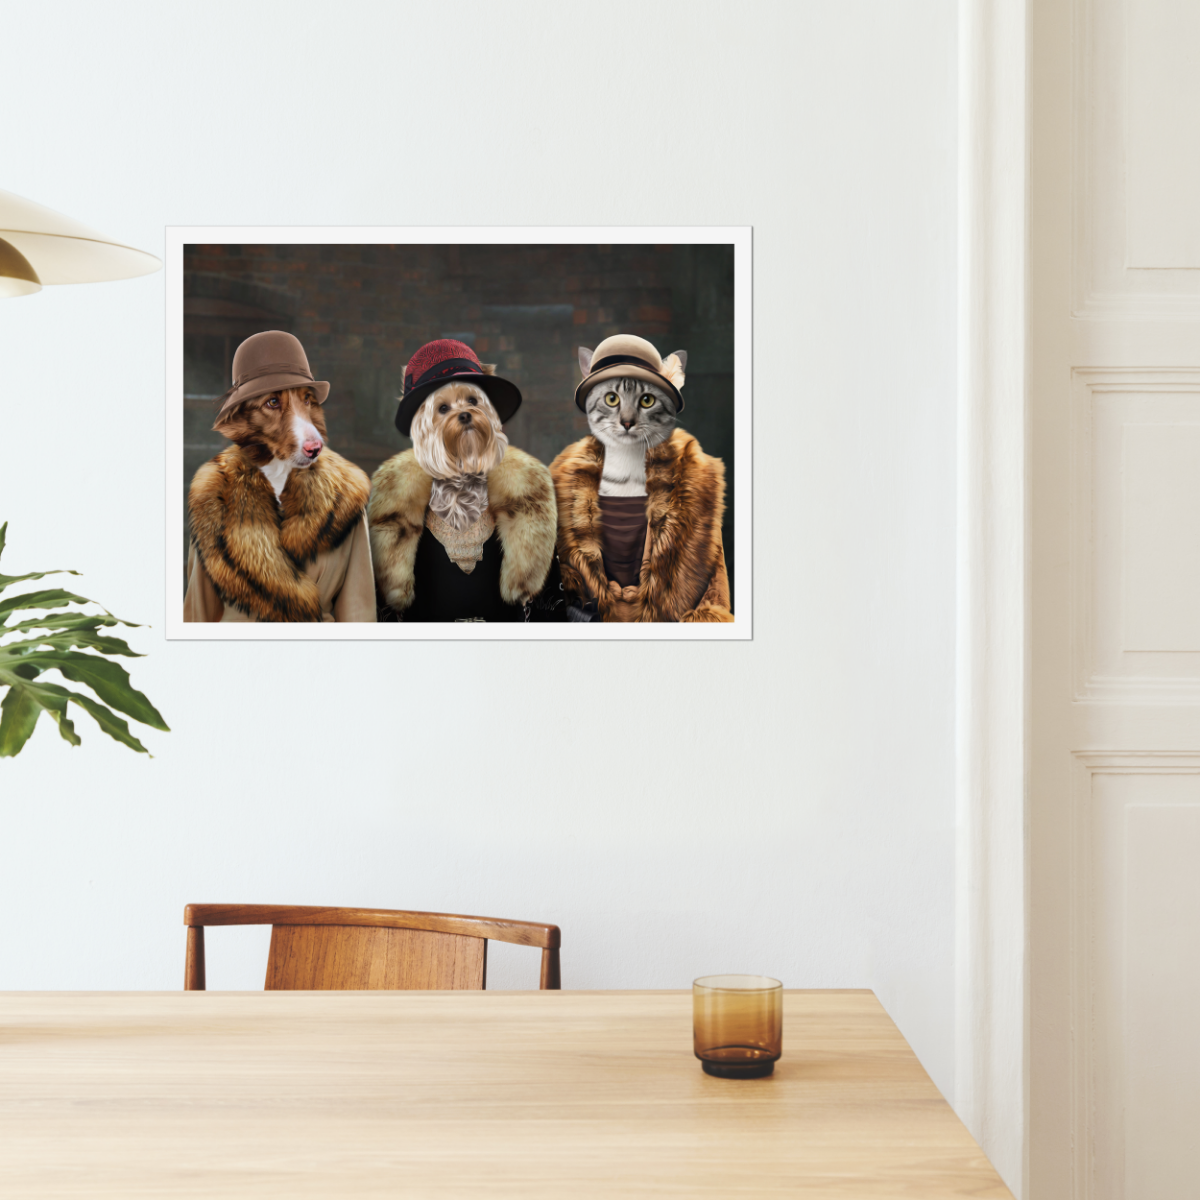 The Women (Peaky Blinders Inspired) 3 Pet: Custom Pet Poster - Paw & Glory - #pet portraits# - #dog portraits# - #pet portraits uk#Paw & Glory, pawandglory, best dog paintings, the admiral dog portrait, pictures for pets, original pet portraits, painting of your dog, admiral pet portrait, pet portrait